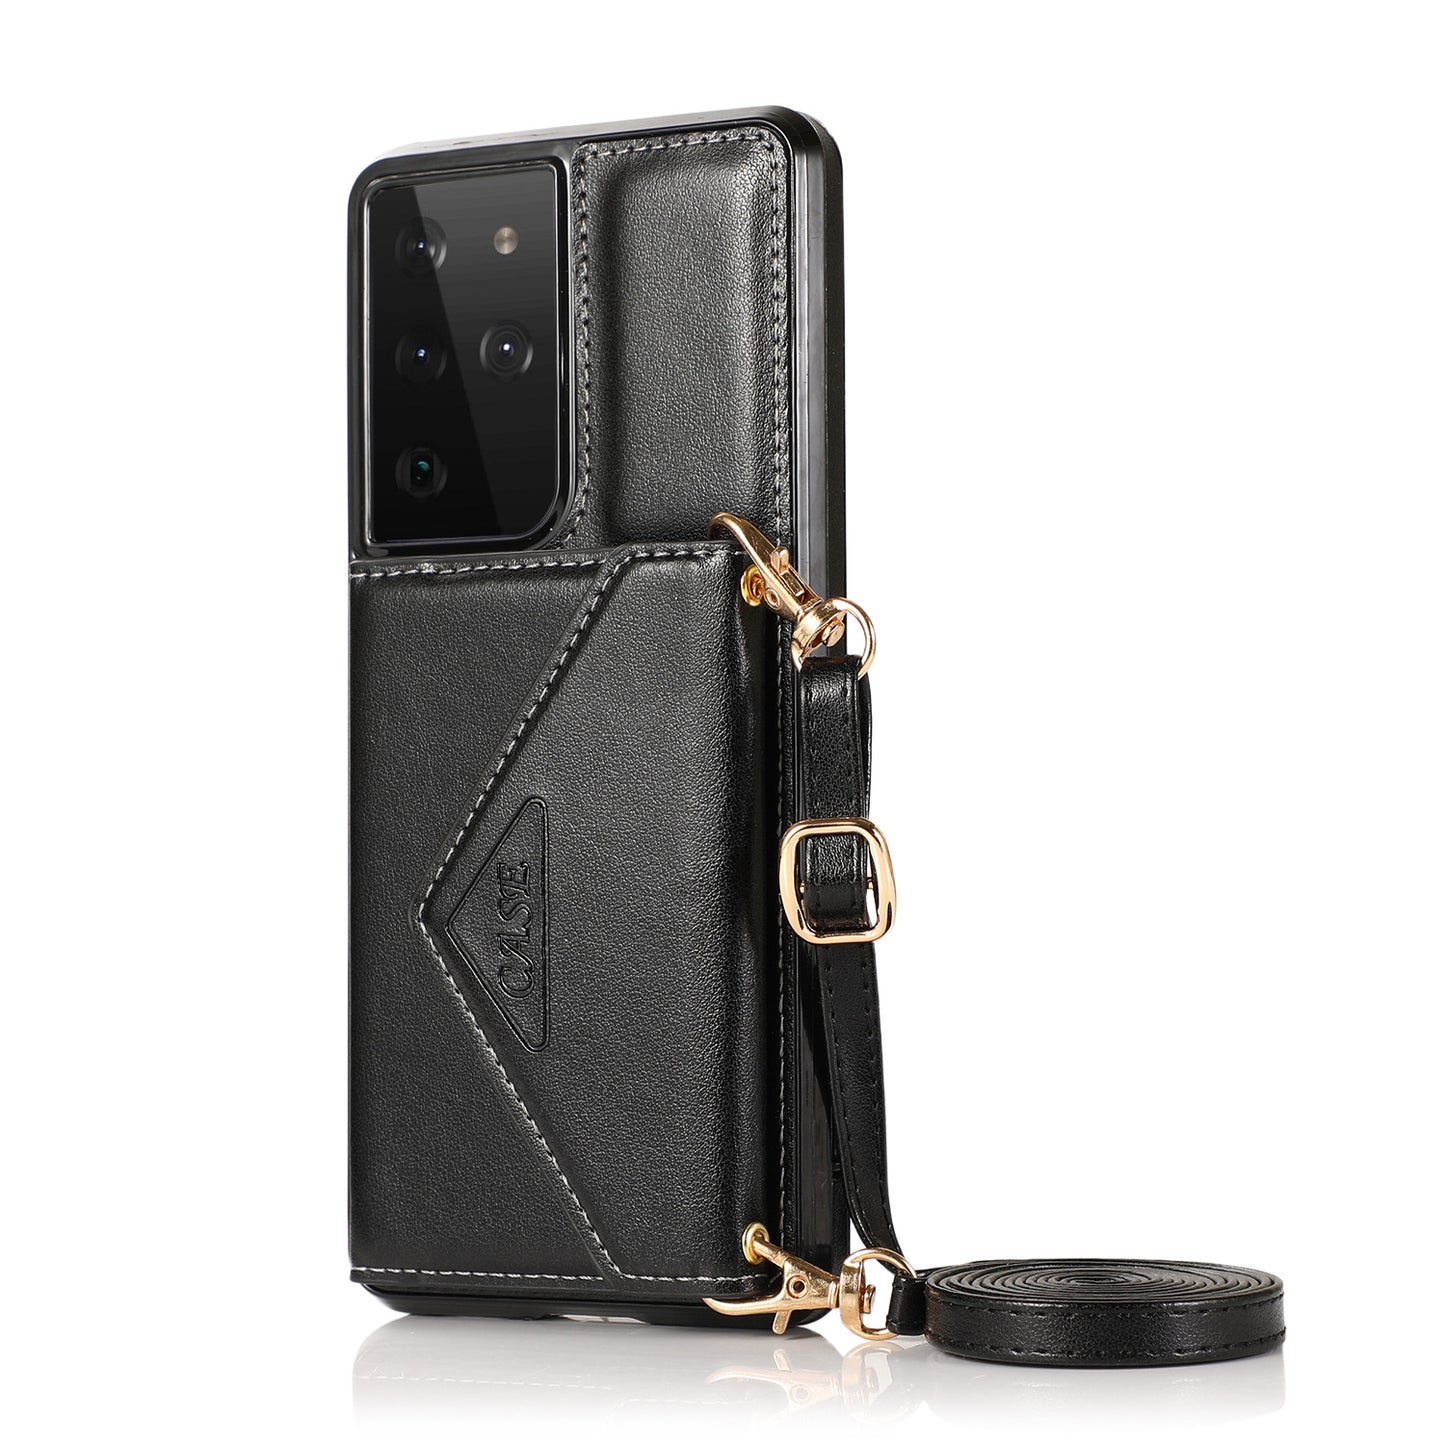 Leather case with cross belt for women compatible with - Samsung Smart Phones